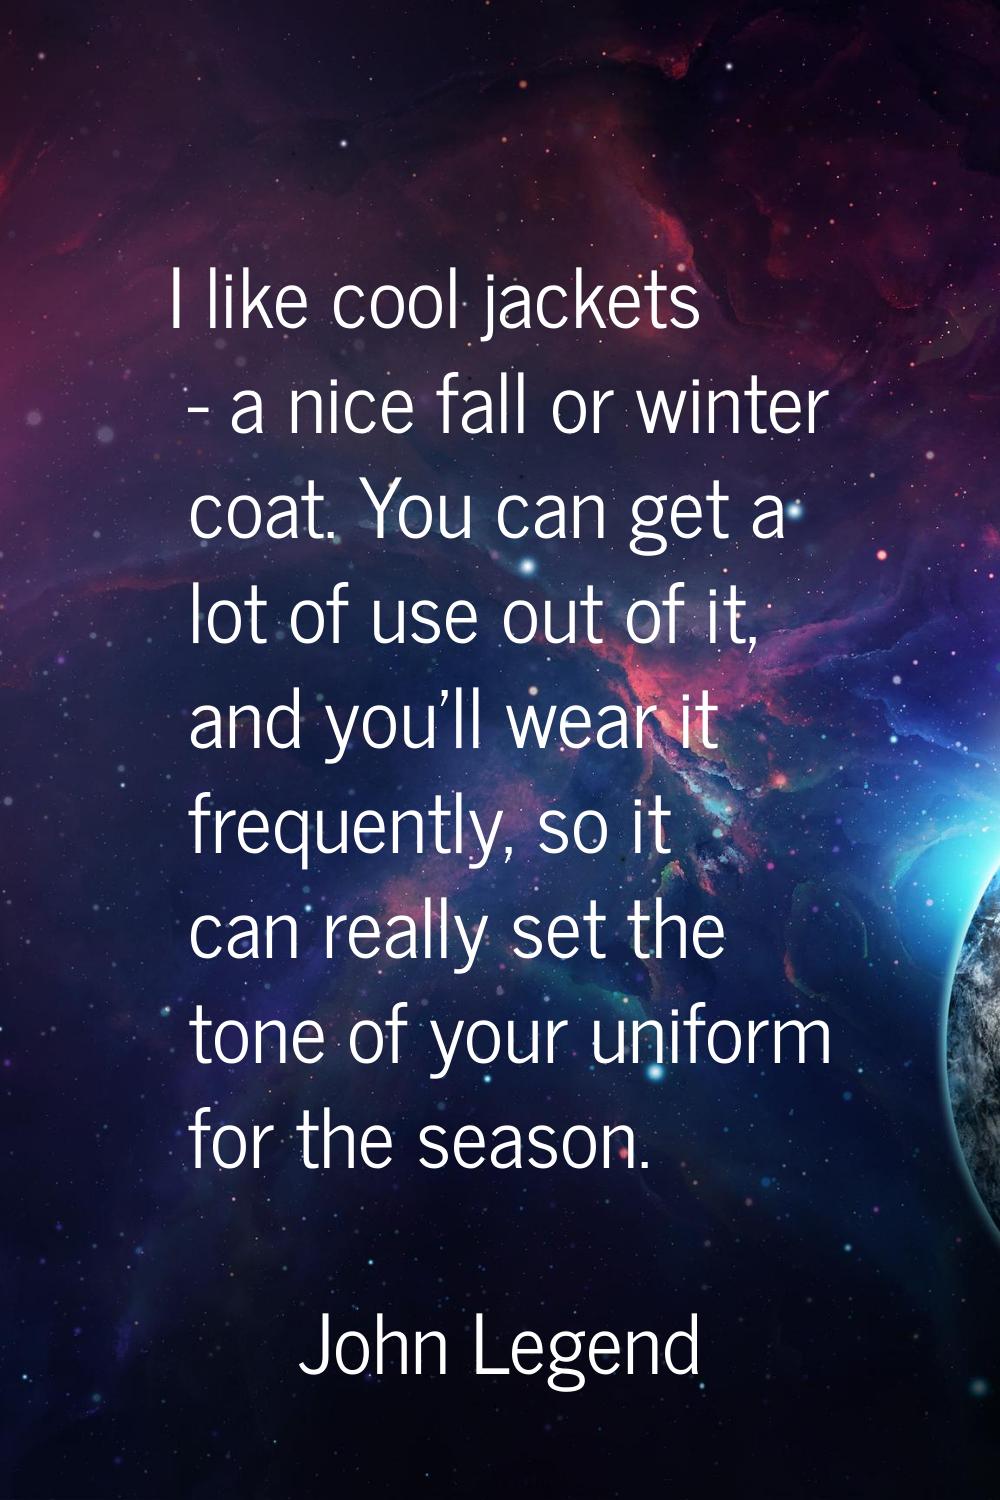 I like cool jackets - a nice fall or winter coat. You can get a lot of use out of it, and you'll we